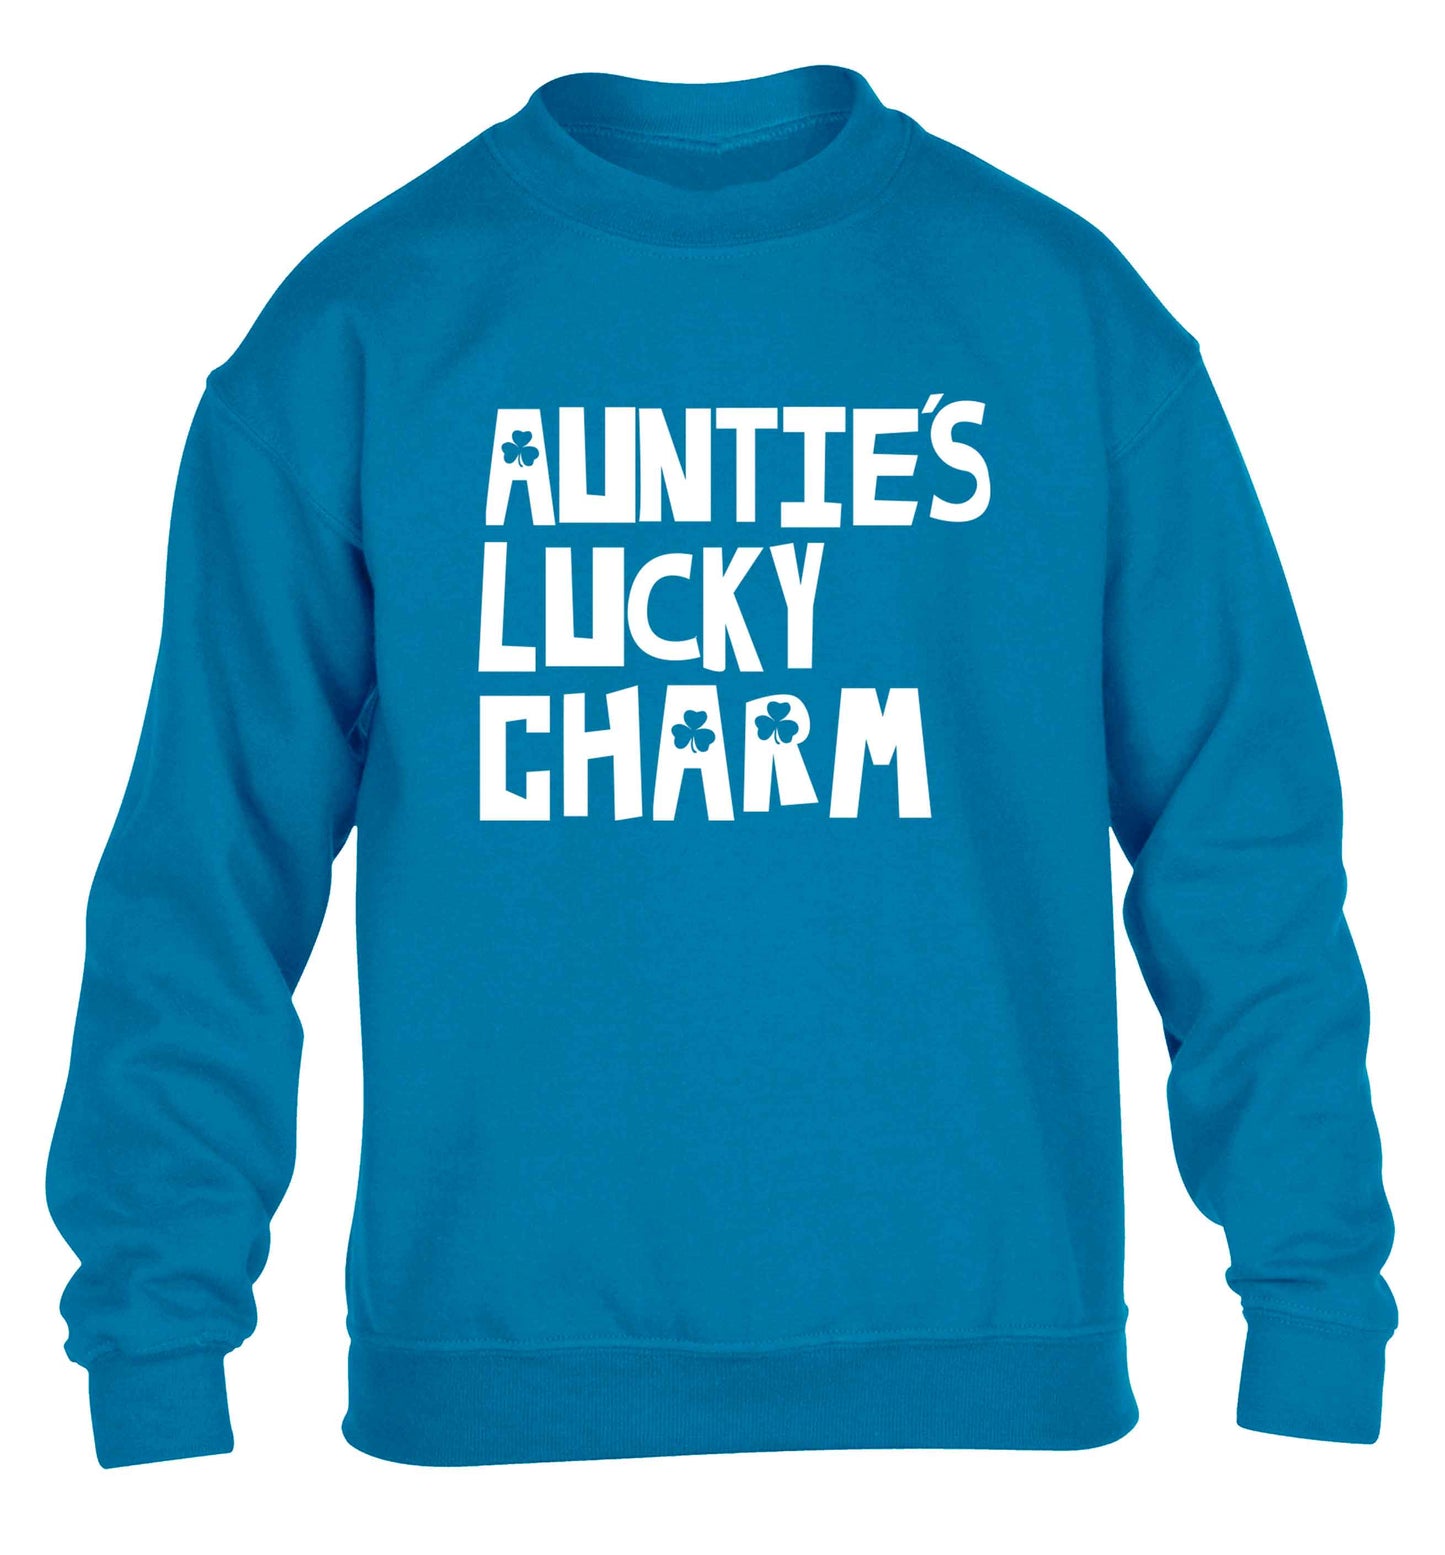 Auntie's lucky charm children's blue sweater 12-13 Years